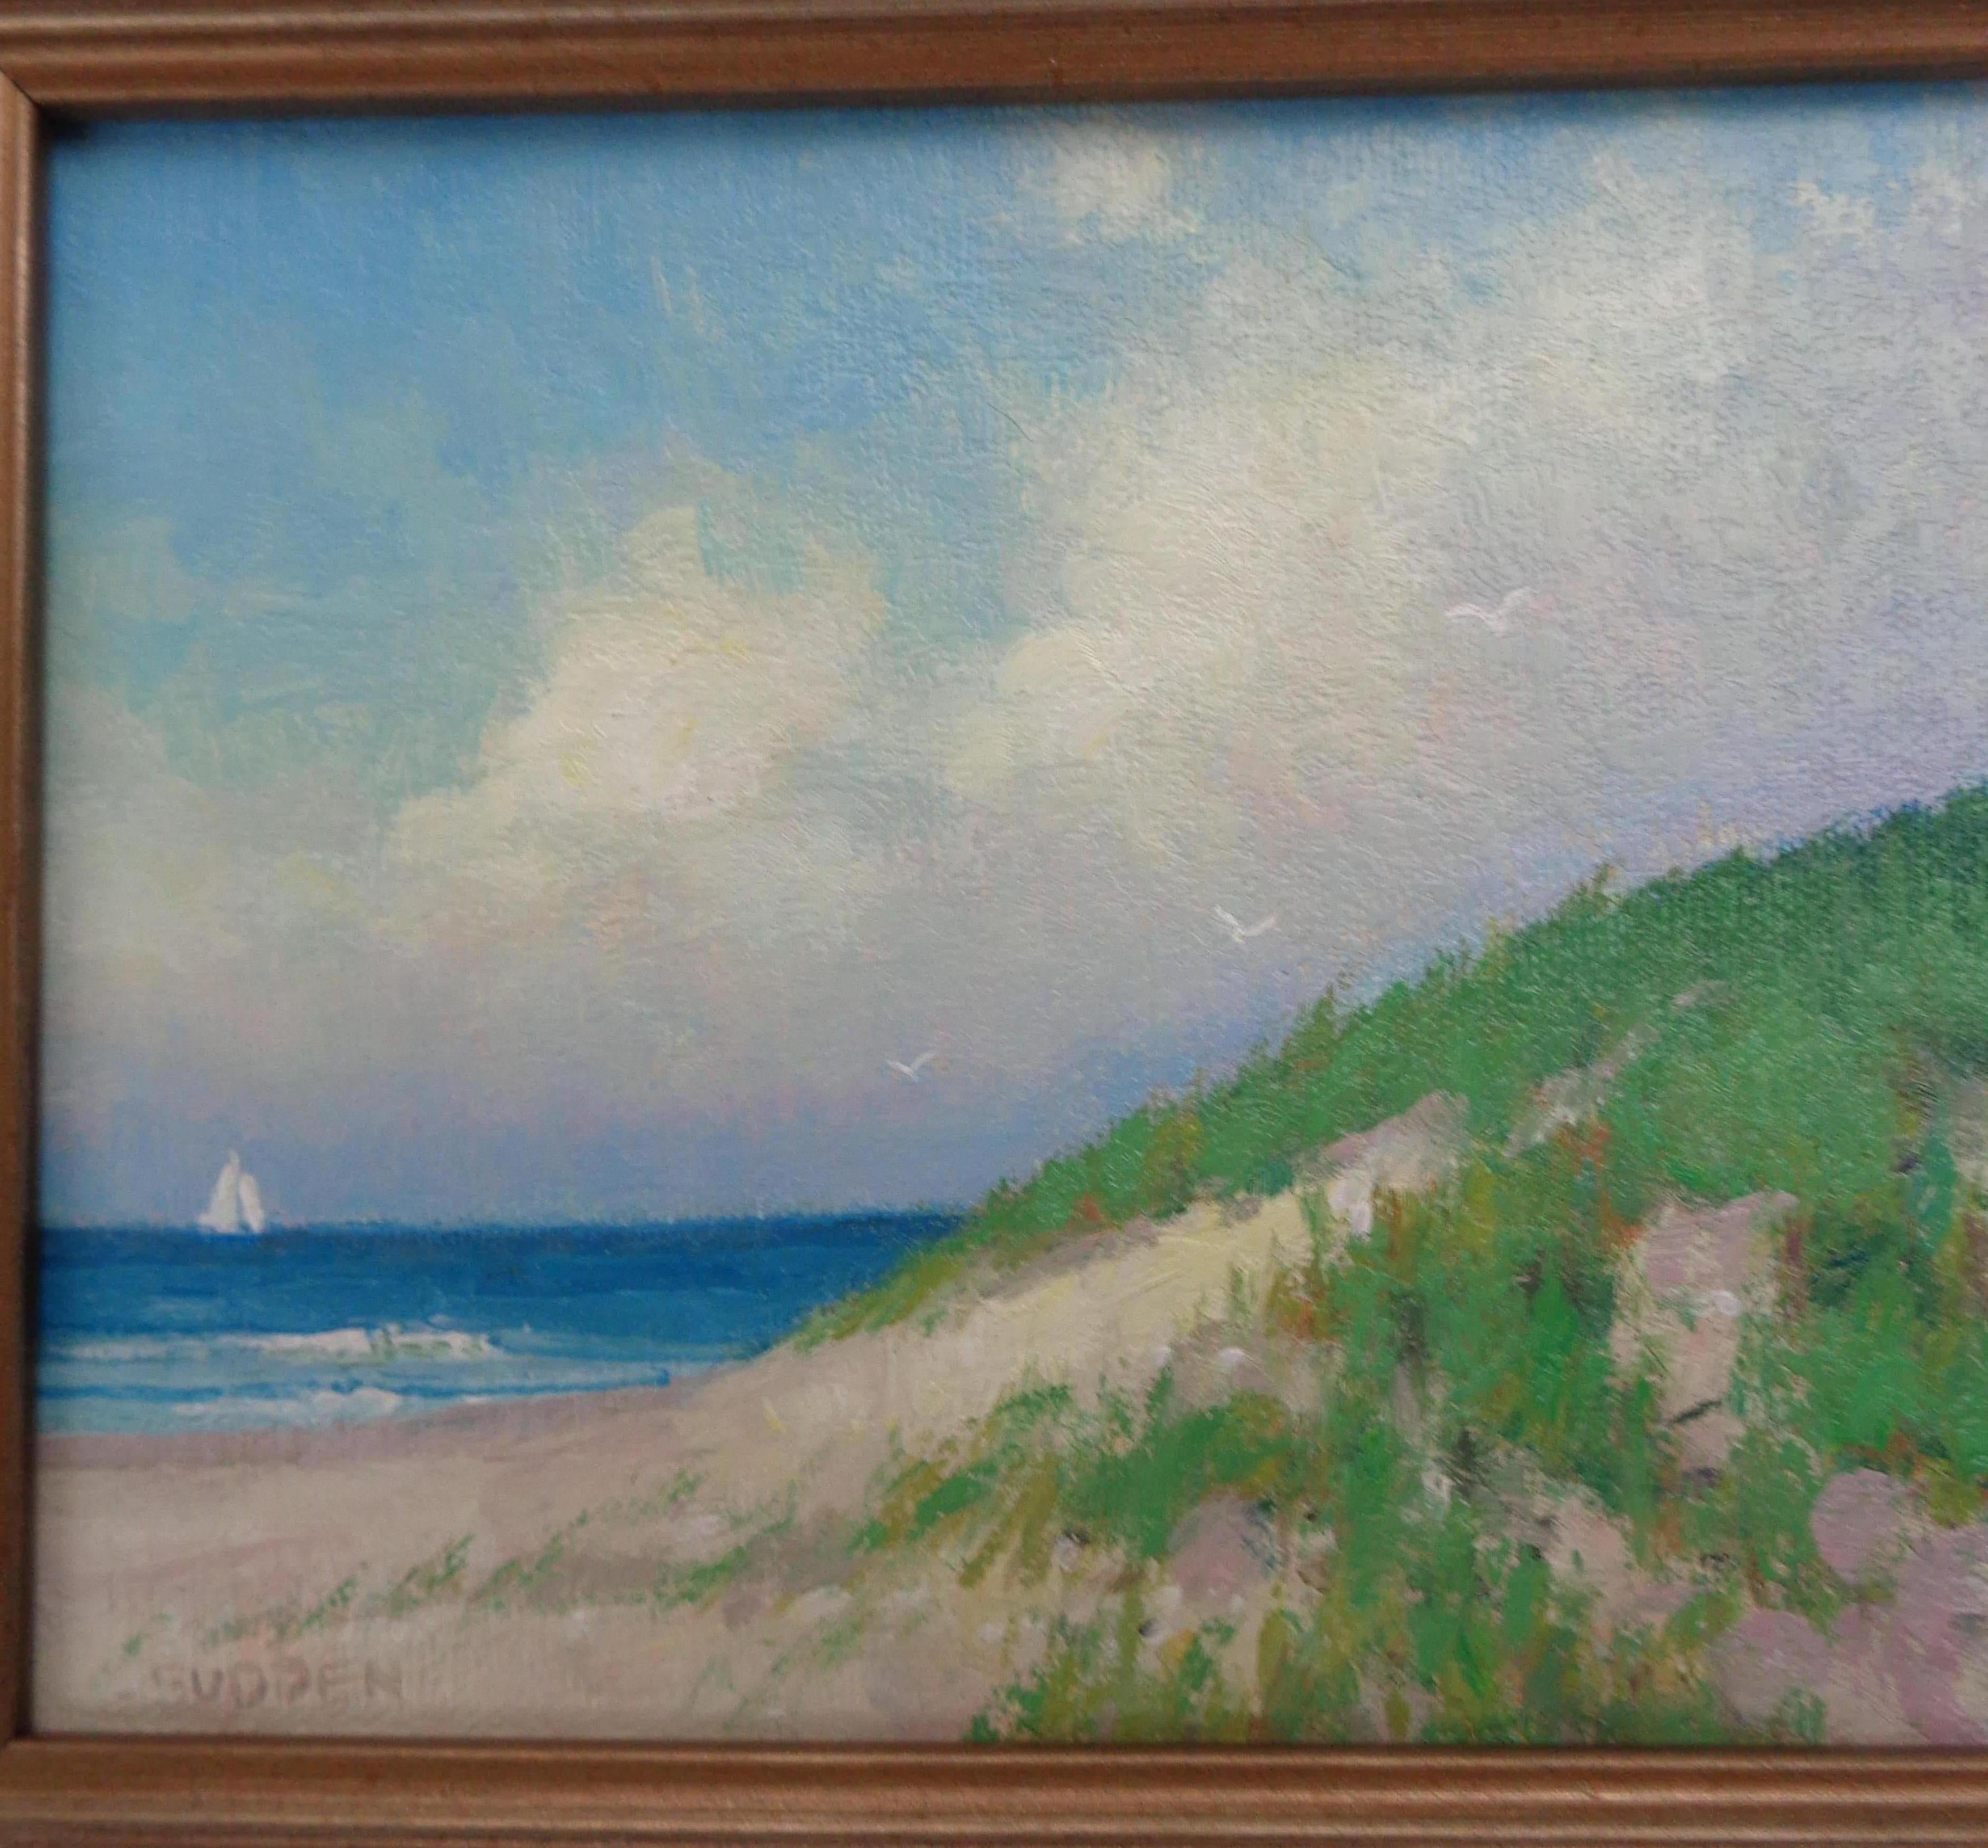 Beach & Ocean Impressionistic Seascape Oil Painting Michael Budden Summer Sky  For Sale 1